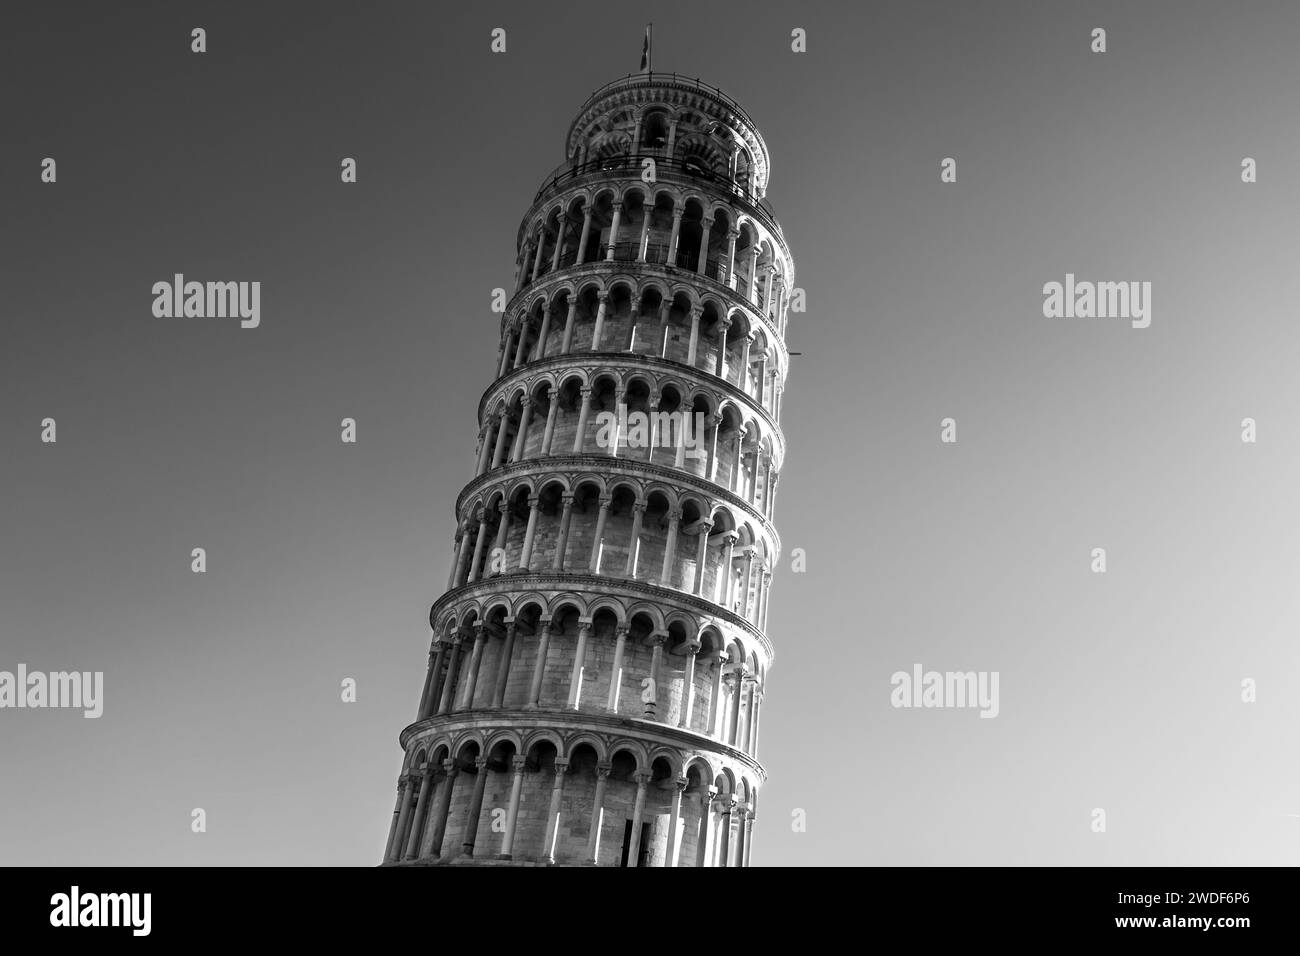 leaning tower of pisa Stock Photo